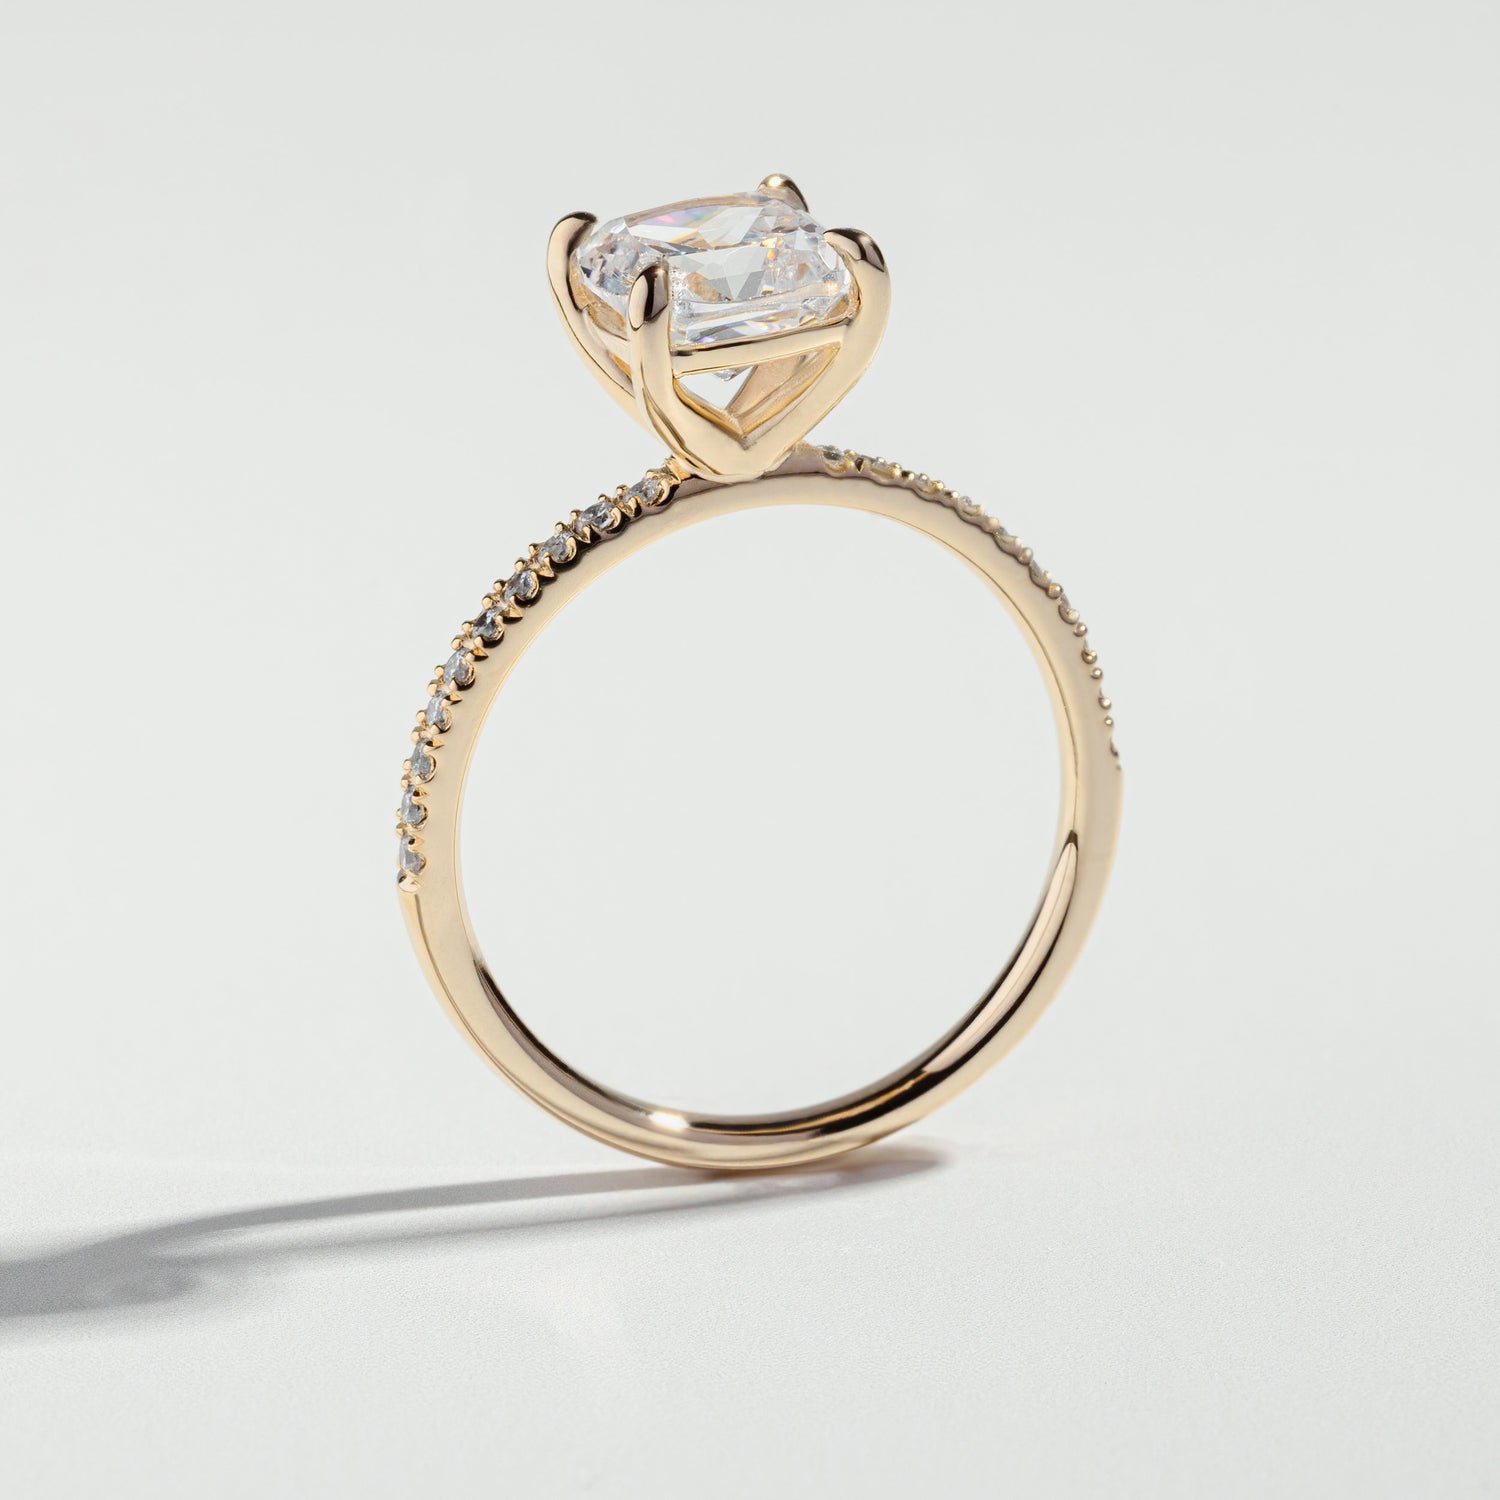  The Cushion Cut Pavé Diamond Ring | Atelier RMR Montreal | Engagement Ring